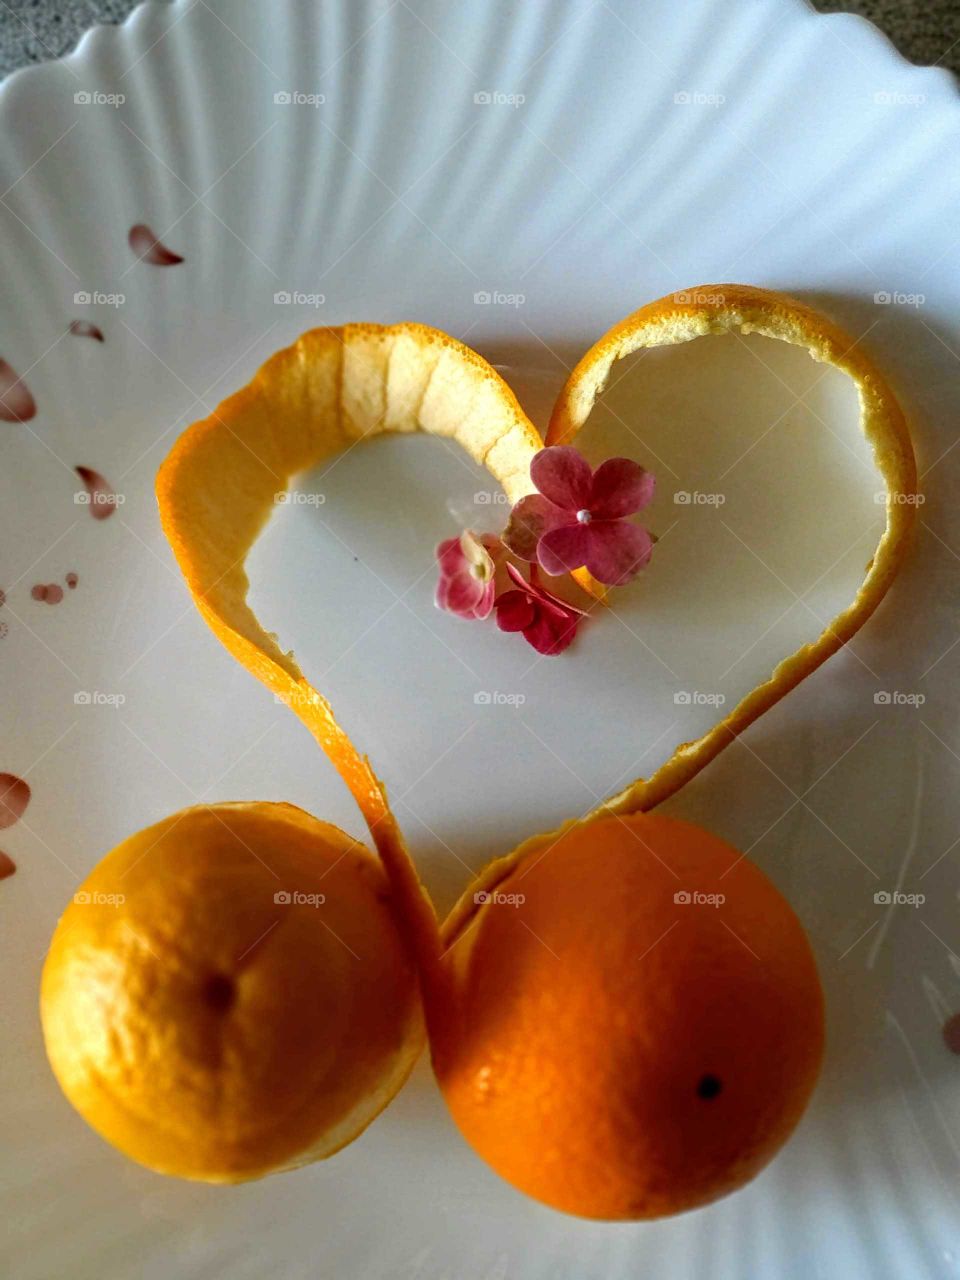 Fruit!: I love orange! a heart shape use two oranges peel. it contains abundant vitamin c, also extract essential oil by peel, has many applications: cosmetic, cleaning. is a treasure. you may make a peel heart by yourself, send to your darling ...